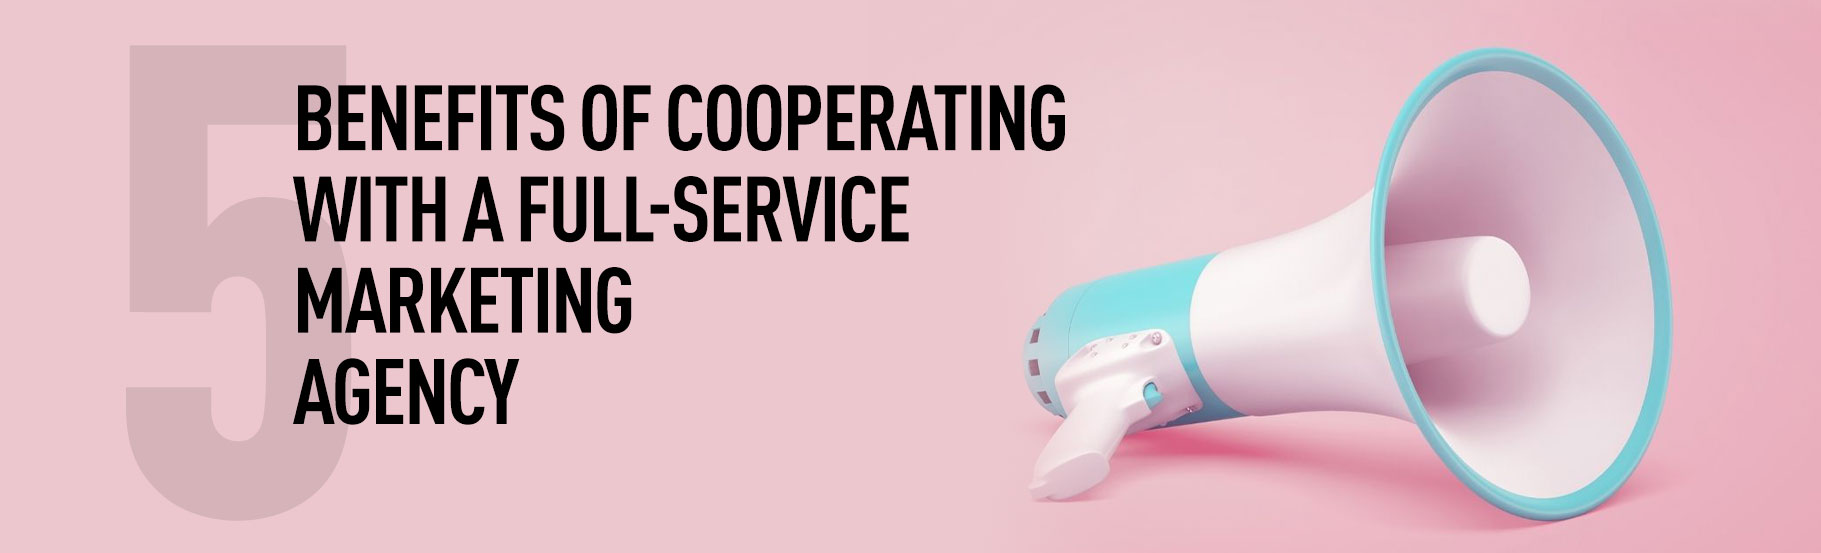 5 benefits of cooperating with a full-service marketing agency